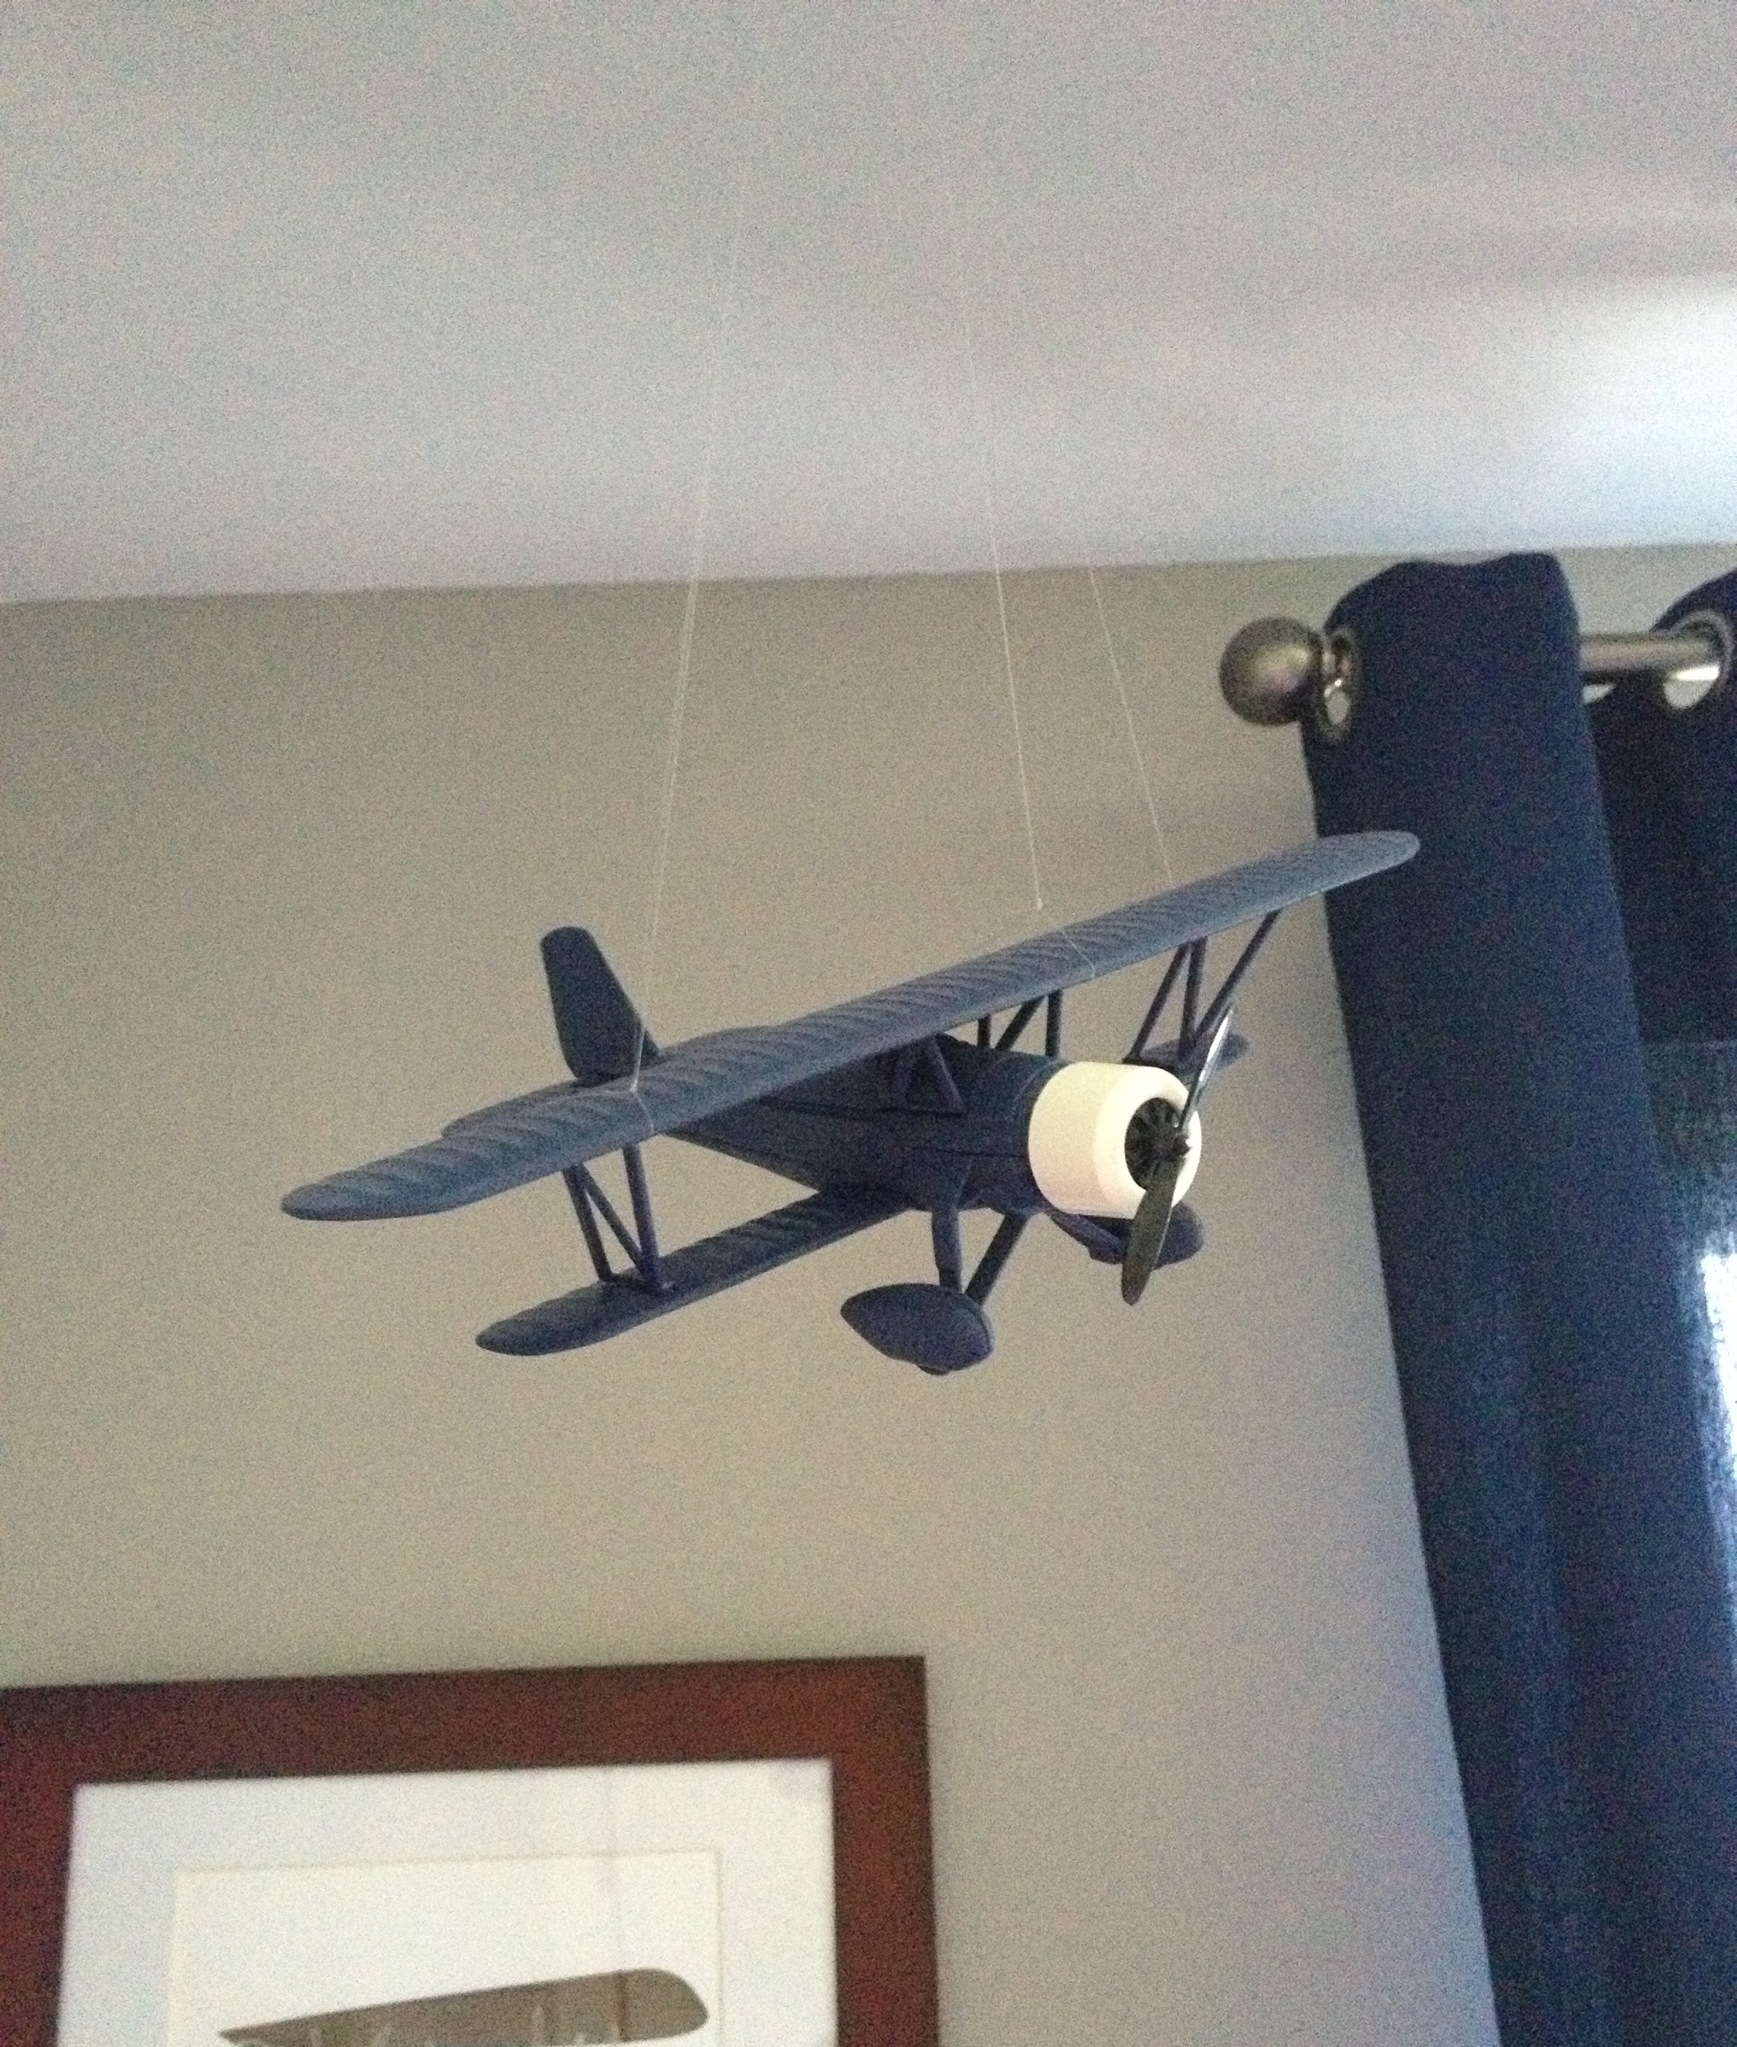 Hanging Airplanes from ceiling studs with fishing line | Airplane ...